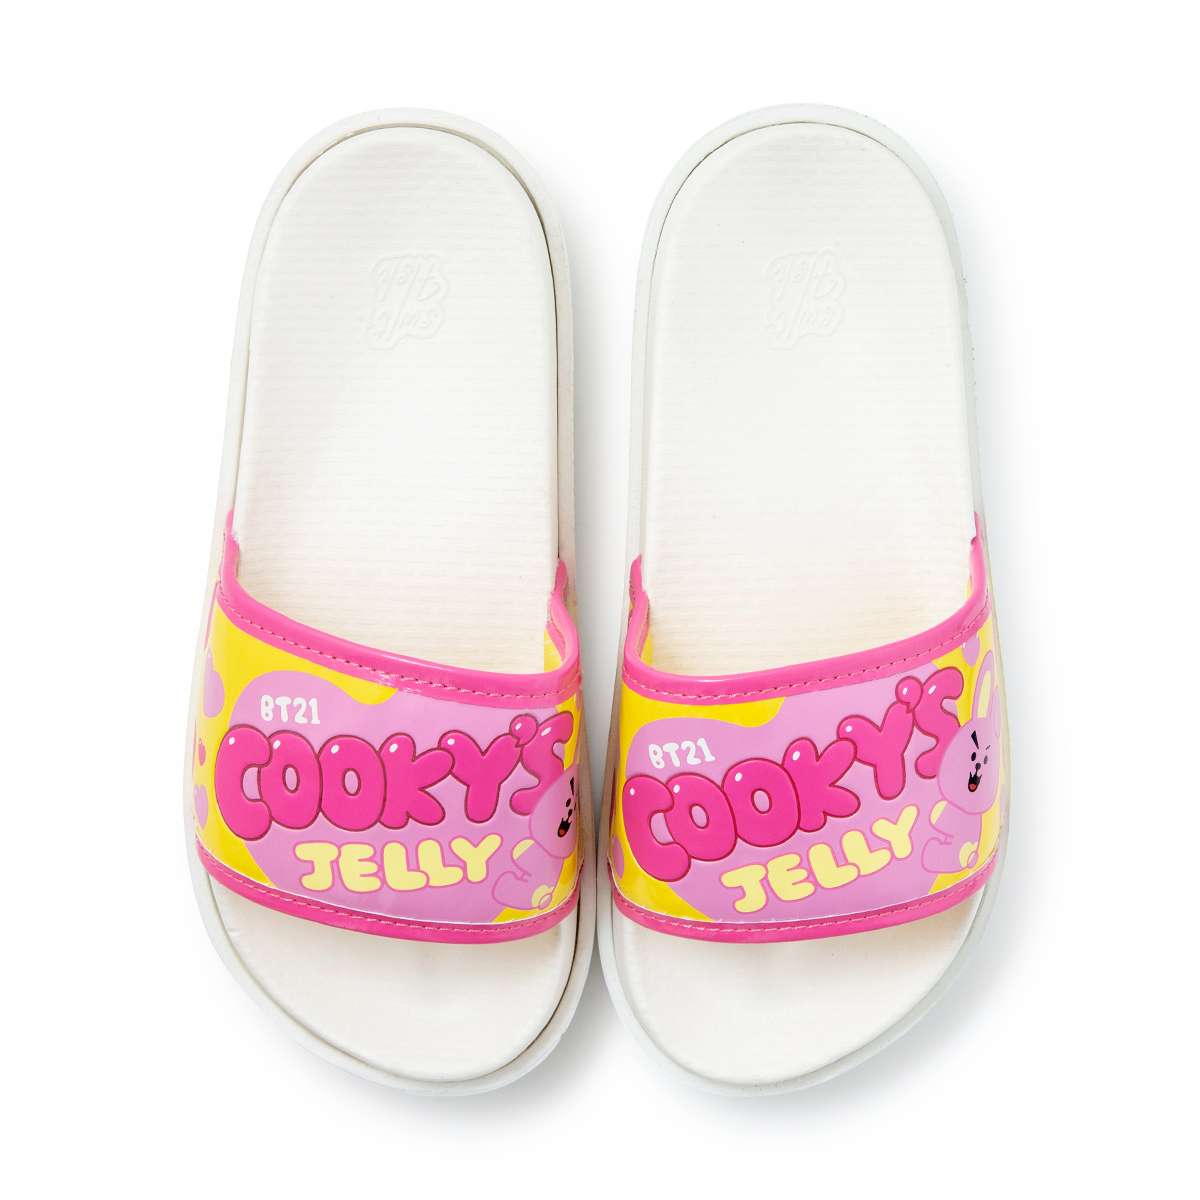 cooky bt21 slippers